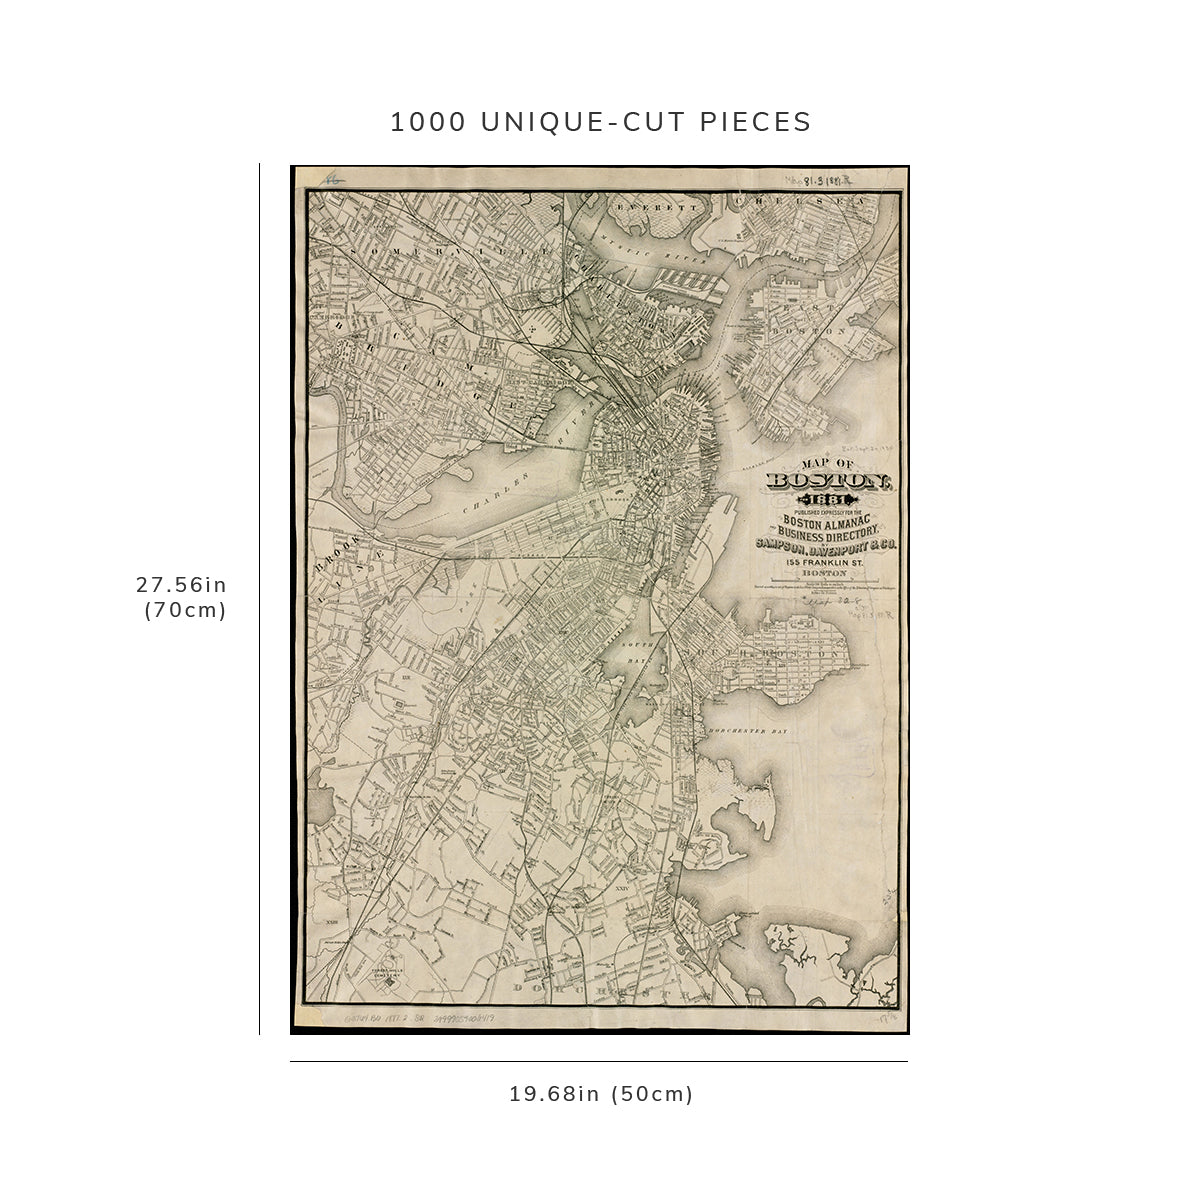 1000 Piece Jigsaw Puzzle: 1881 Map of Boston, for 1881 Published expressly